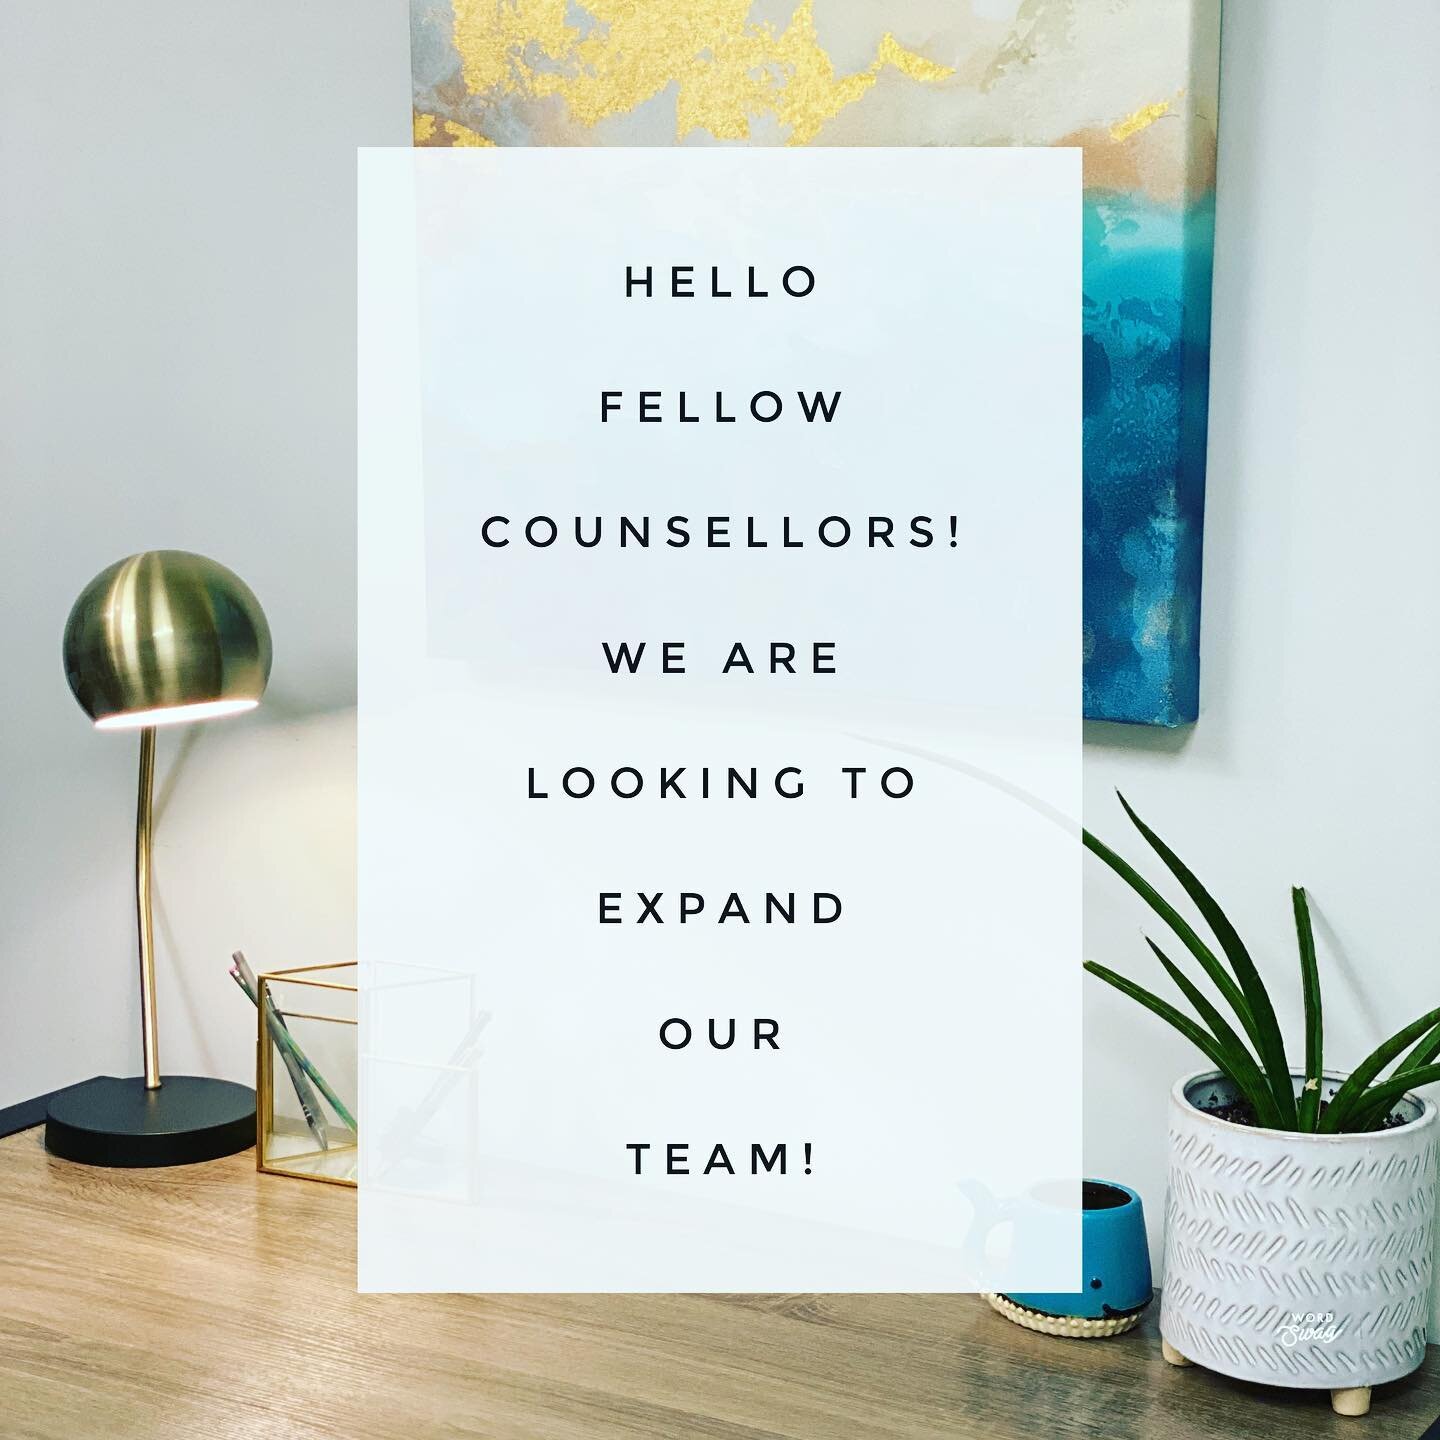 Are you a Clinical Counsellor interested in working in a busy and growing group practice operating both online and in-person in Maple Ridge, BC? We would love to connect with you to see if you might be a fit to join our team. Please contact me with y